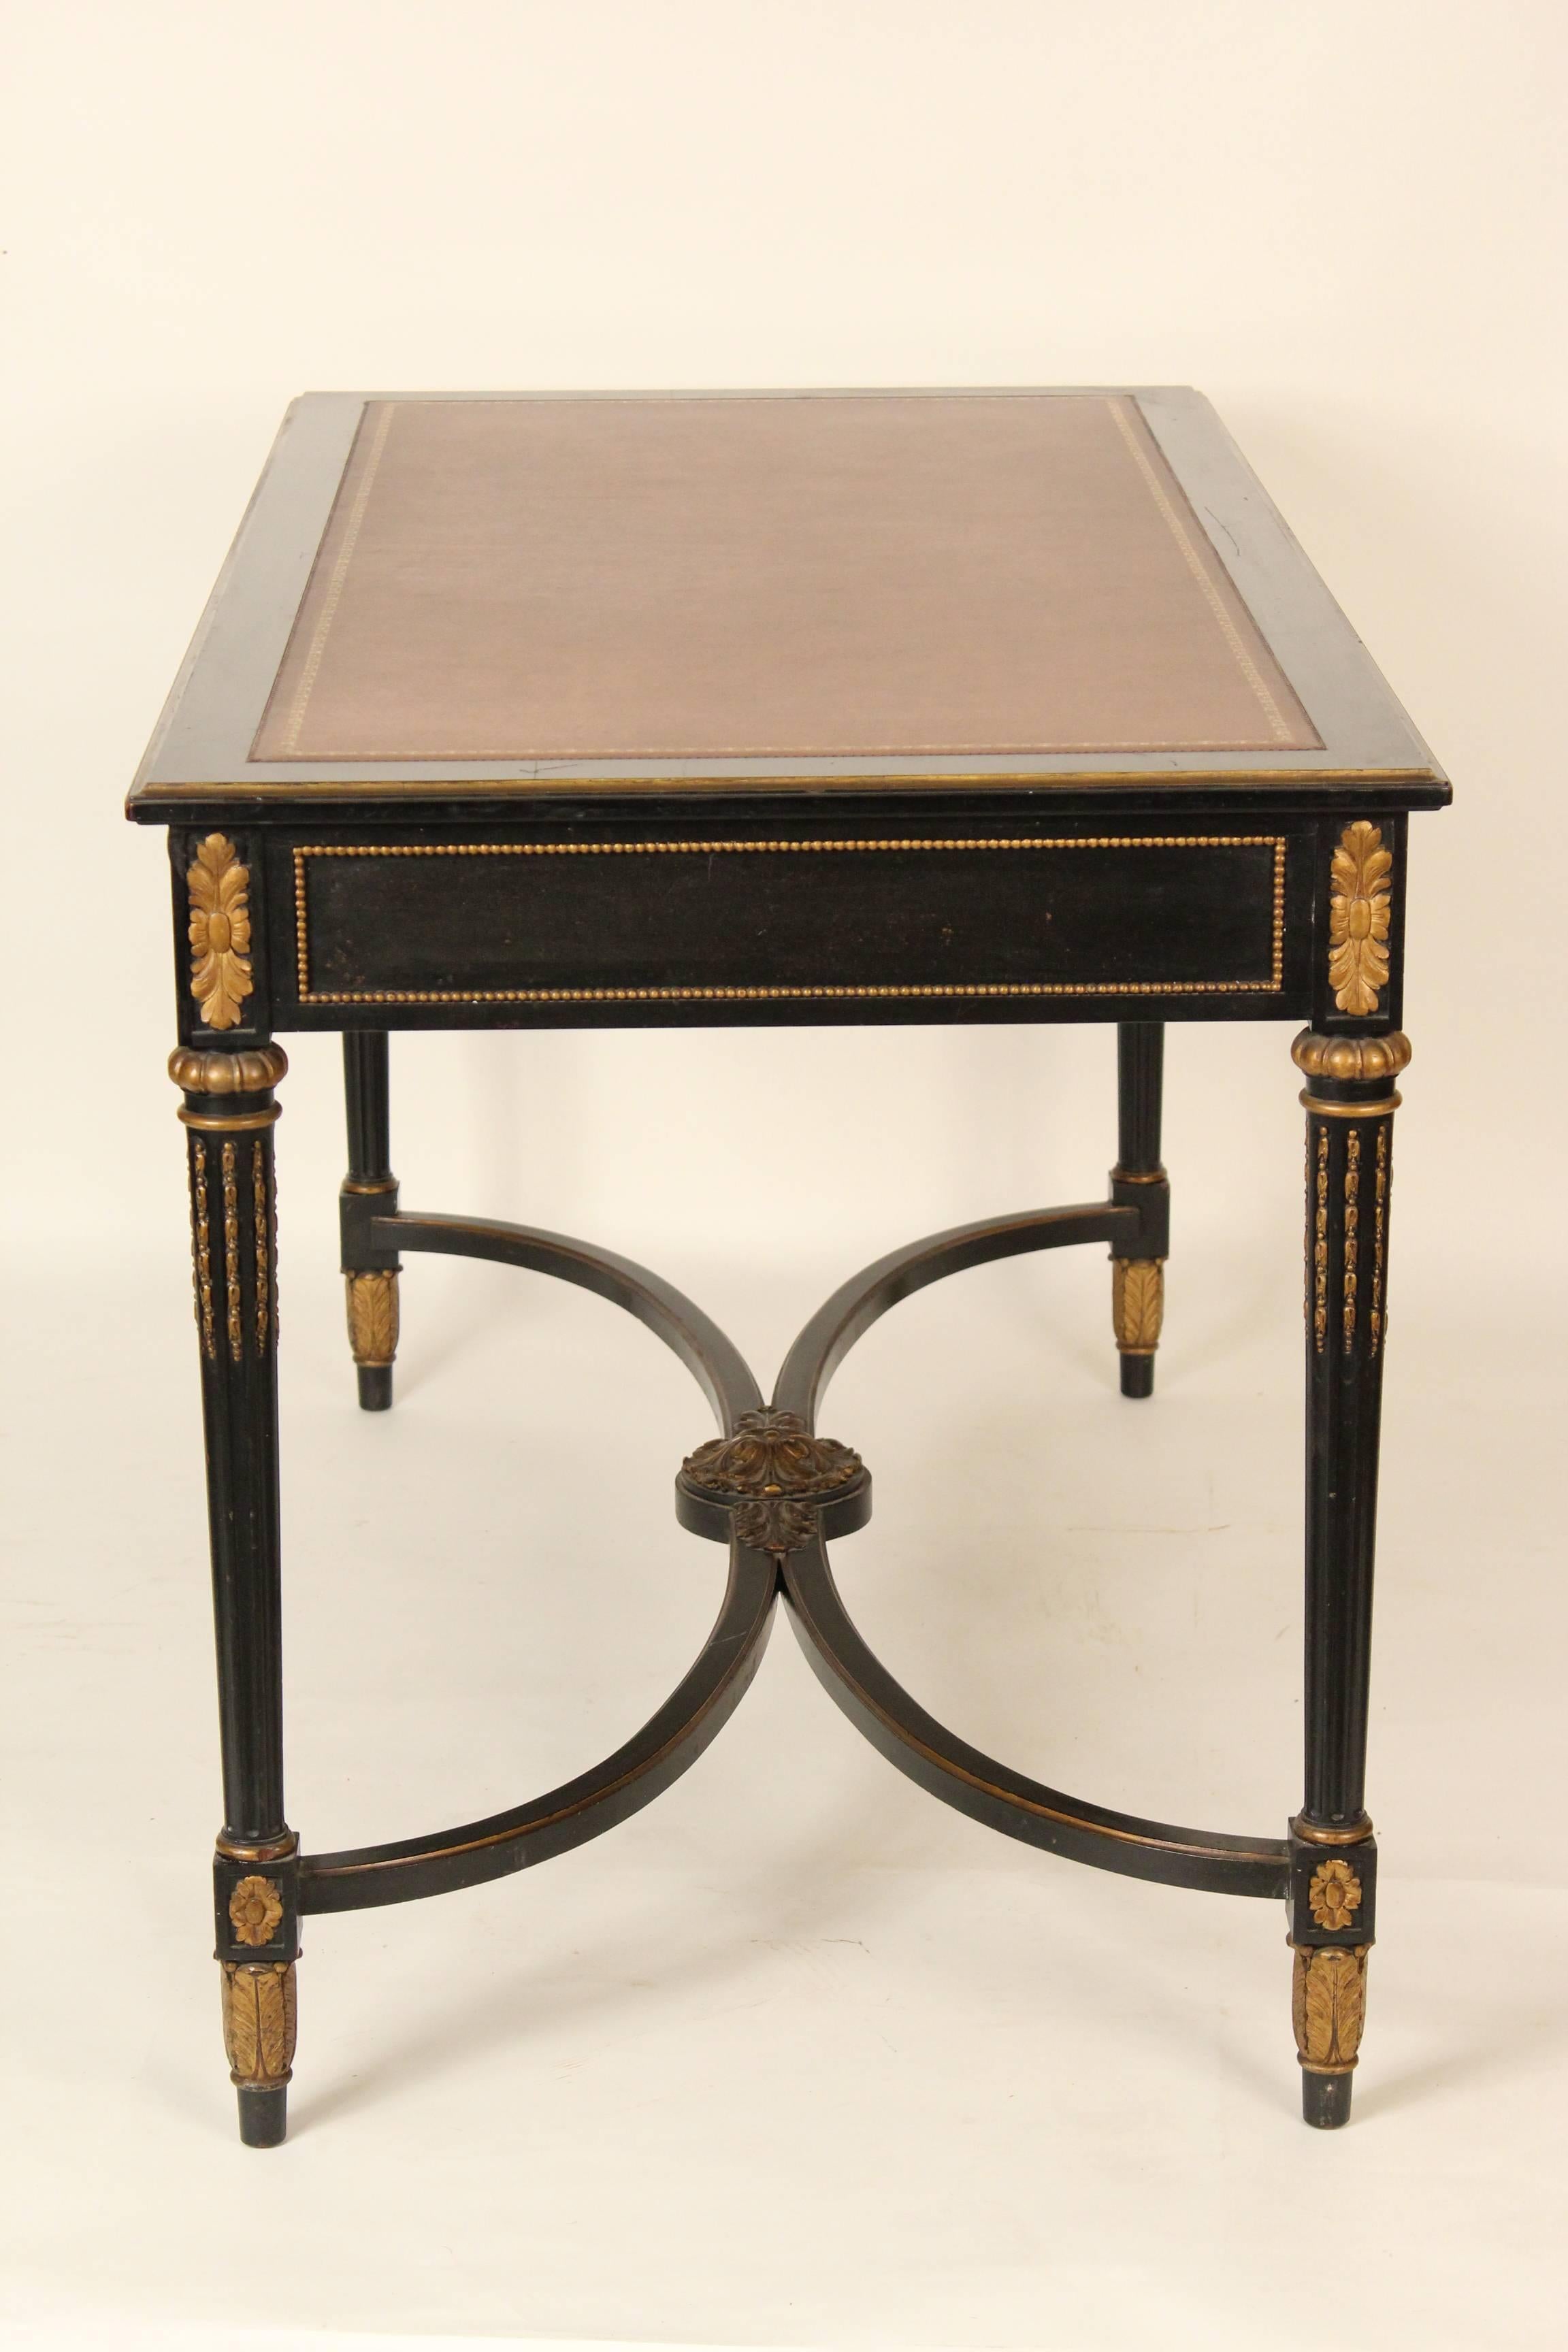 Louis XVI style black painted and gilt decorated desk with a later tooled leather top, circa 1930.